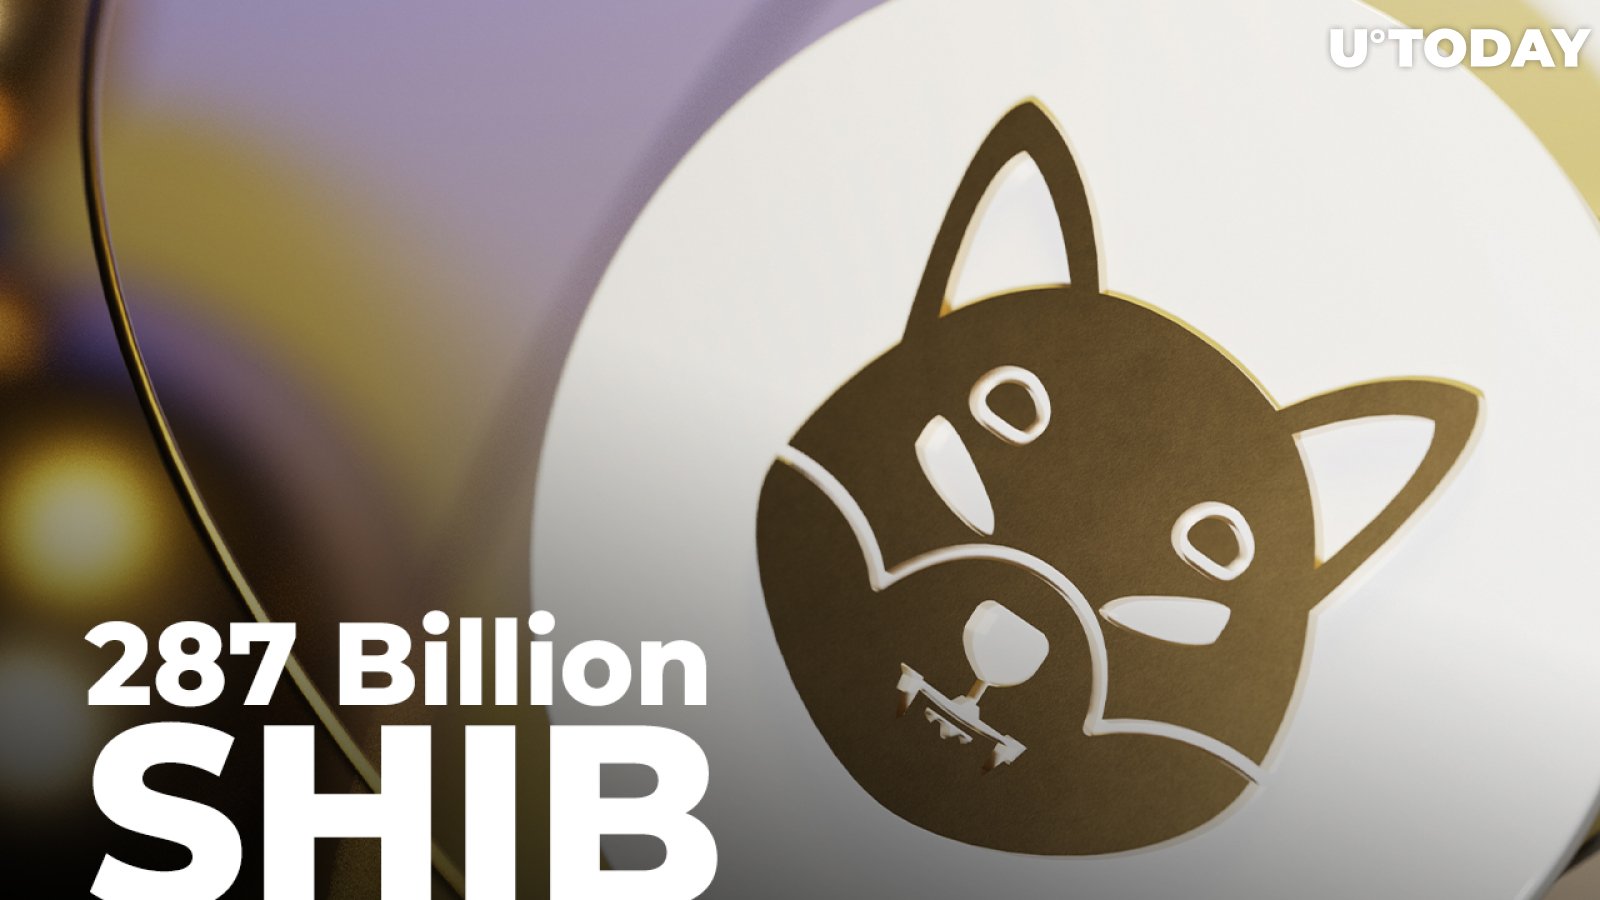 287 Billion SHIB Purchased by Biggest Whale on Ethereum Network